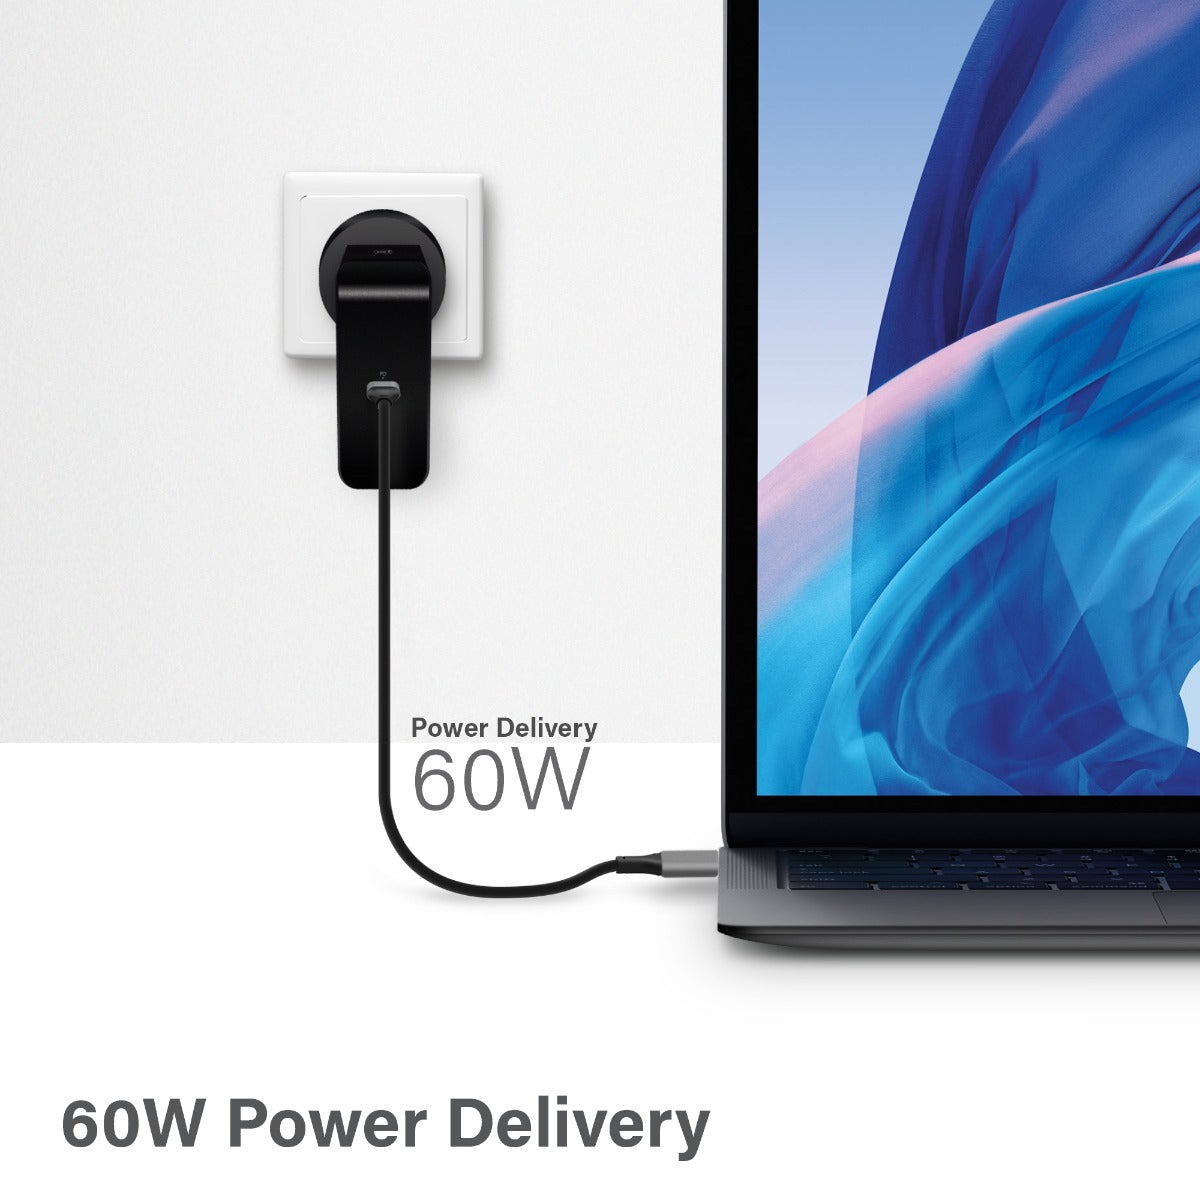 USB-C Laptop/Macbook Wall Charger 60W with Power Delivery– Travel Edition with AU, EU, UK, US Plugs and 2m Cable